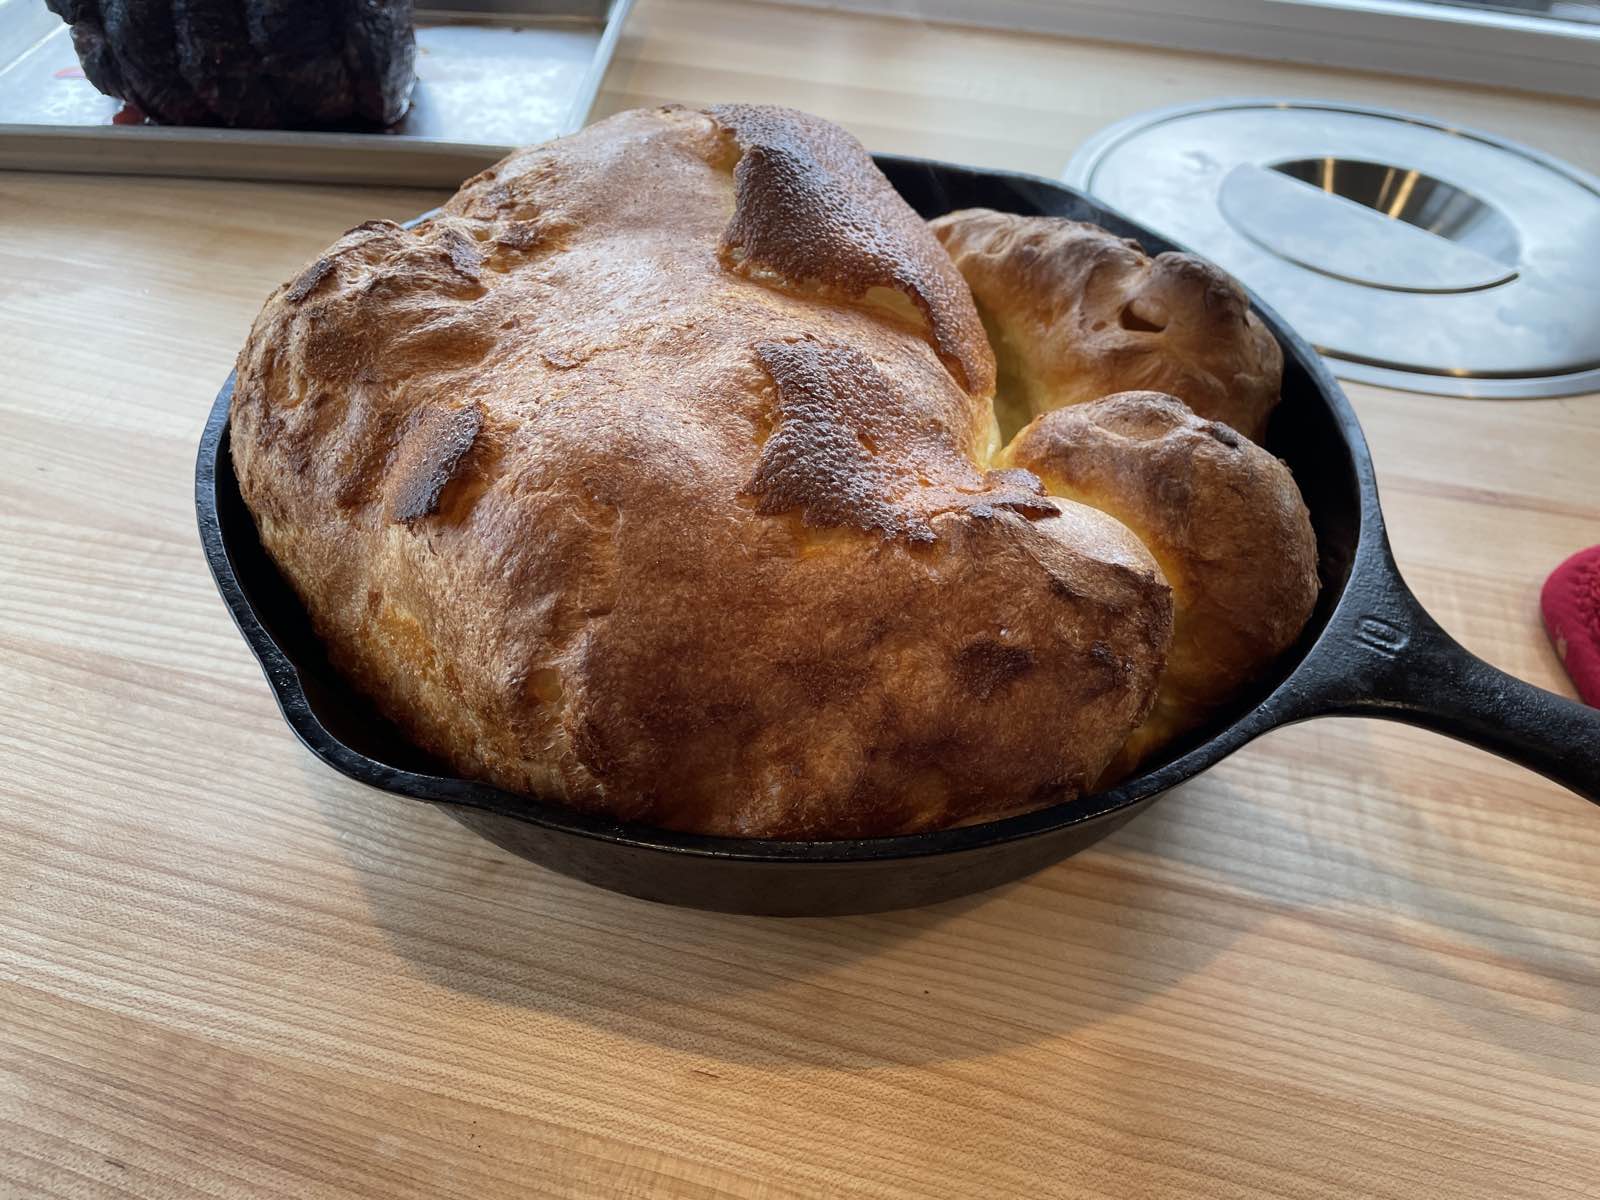 A golden brown yorkshire pudding